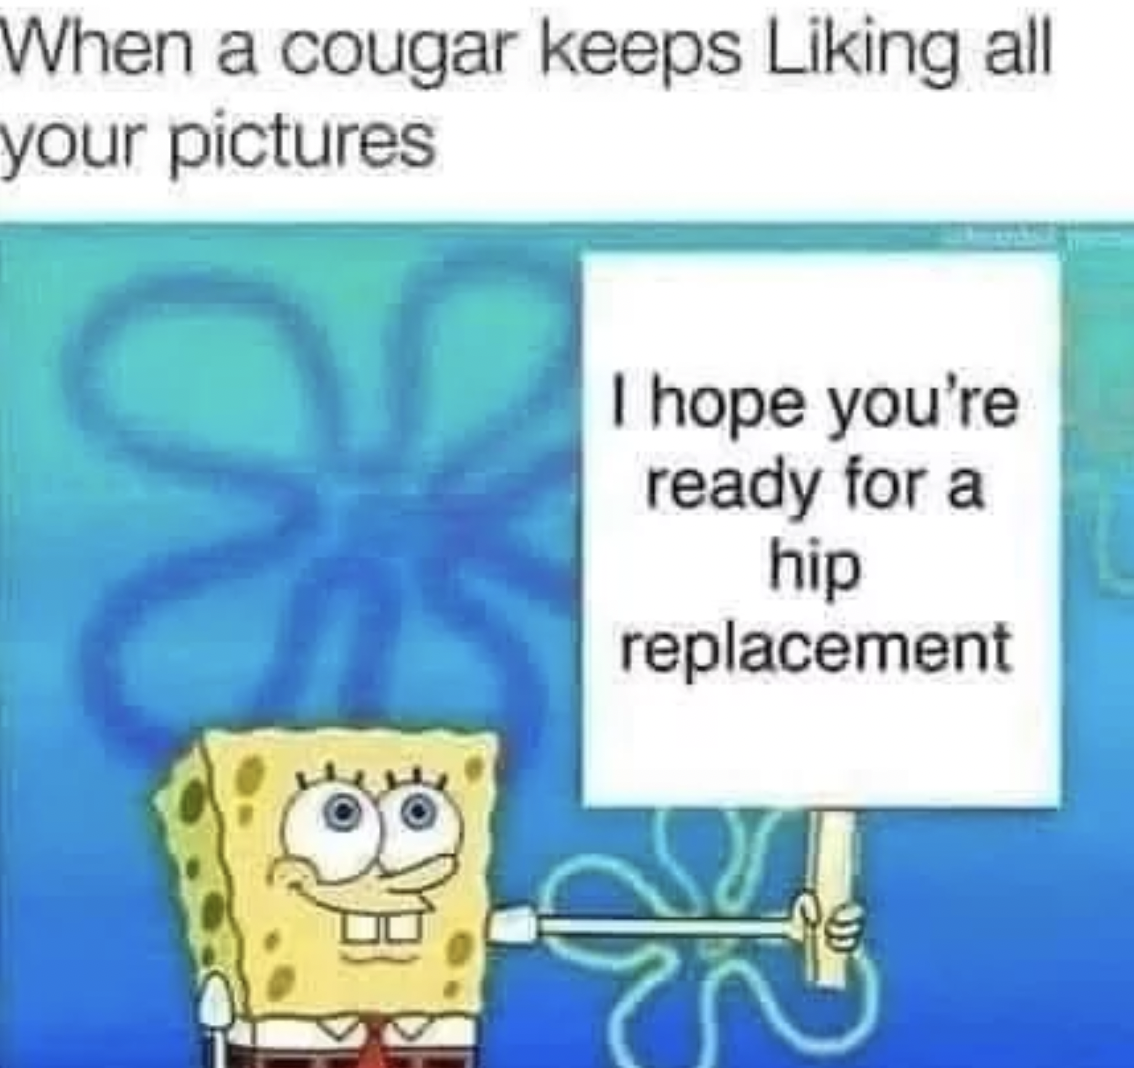 really wanna be your friend but i have no idea how to start a conversat - When a cougar keeps Liking all your pictures I hope you're ready for a hip replacement